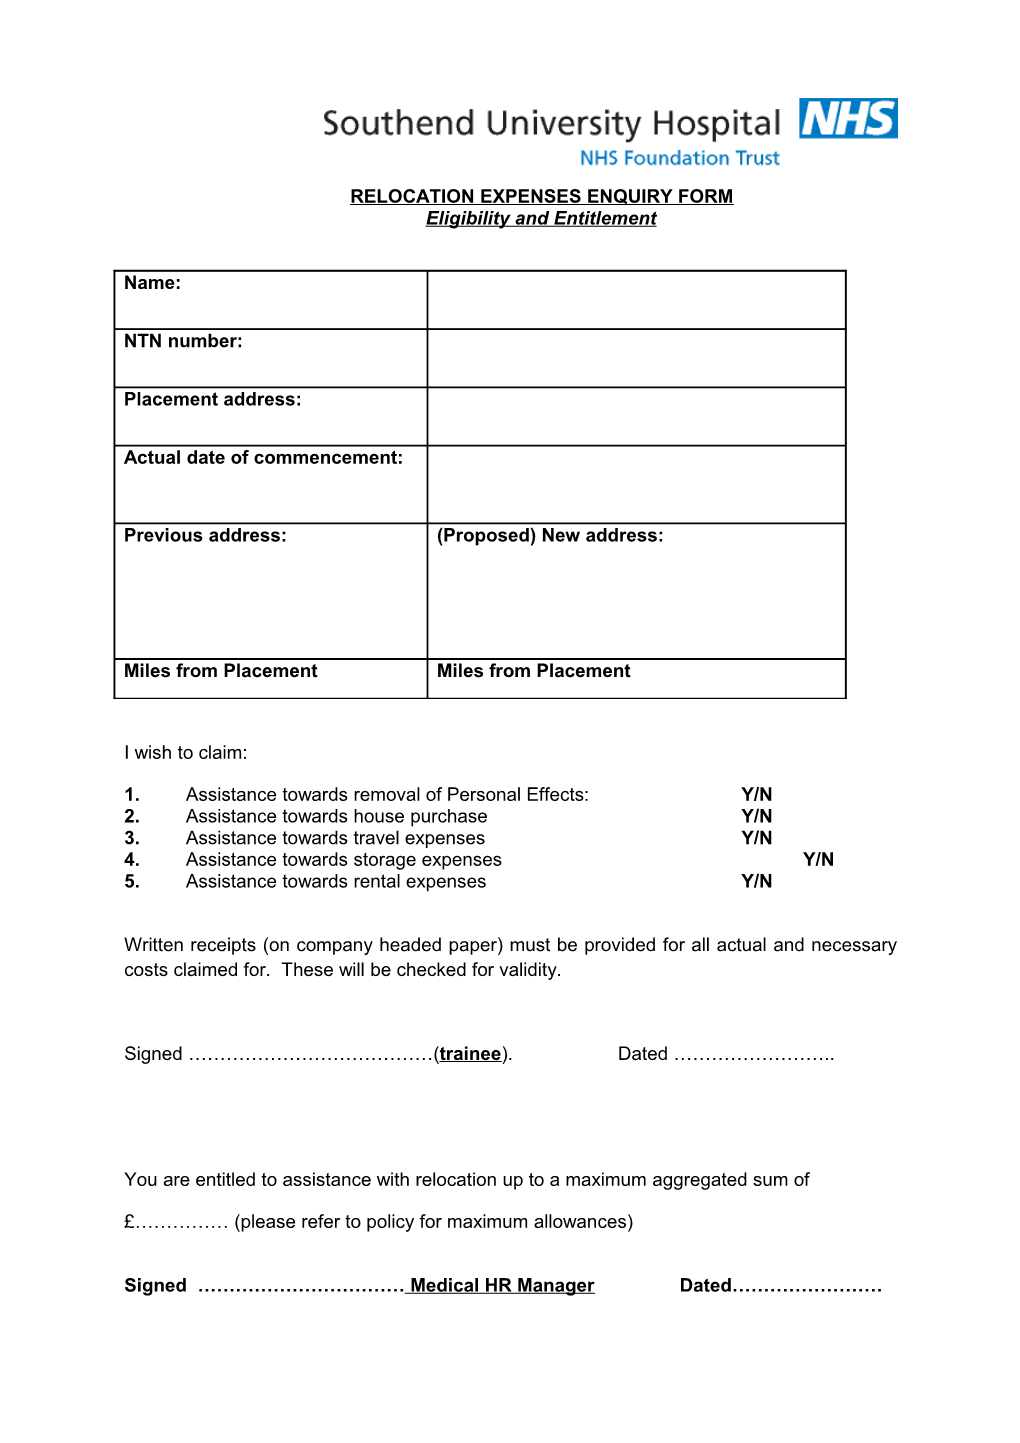 Relocation Expenses Enquiry Form